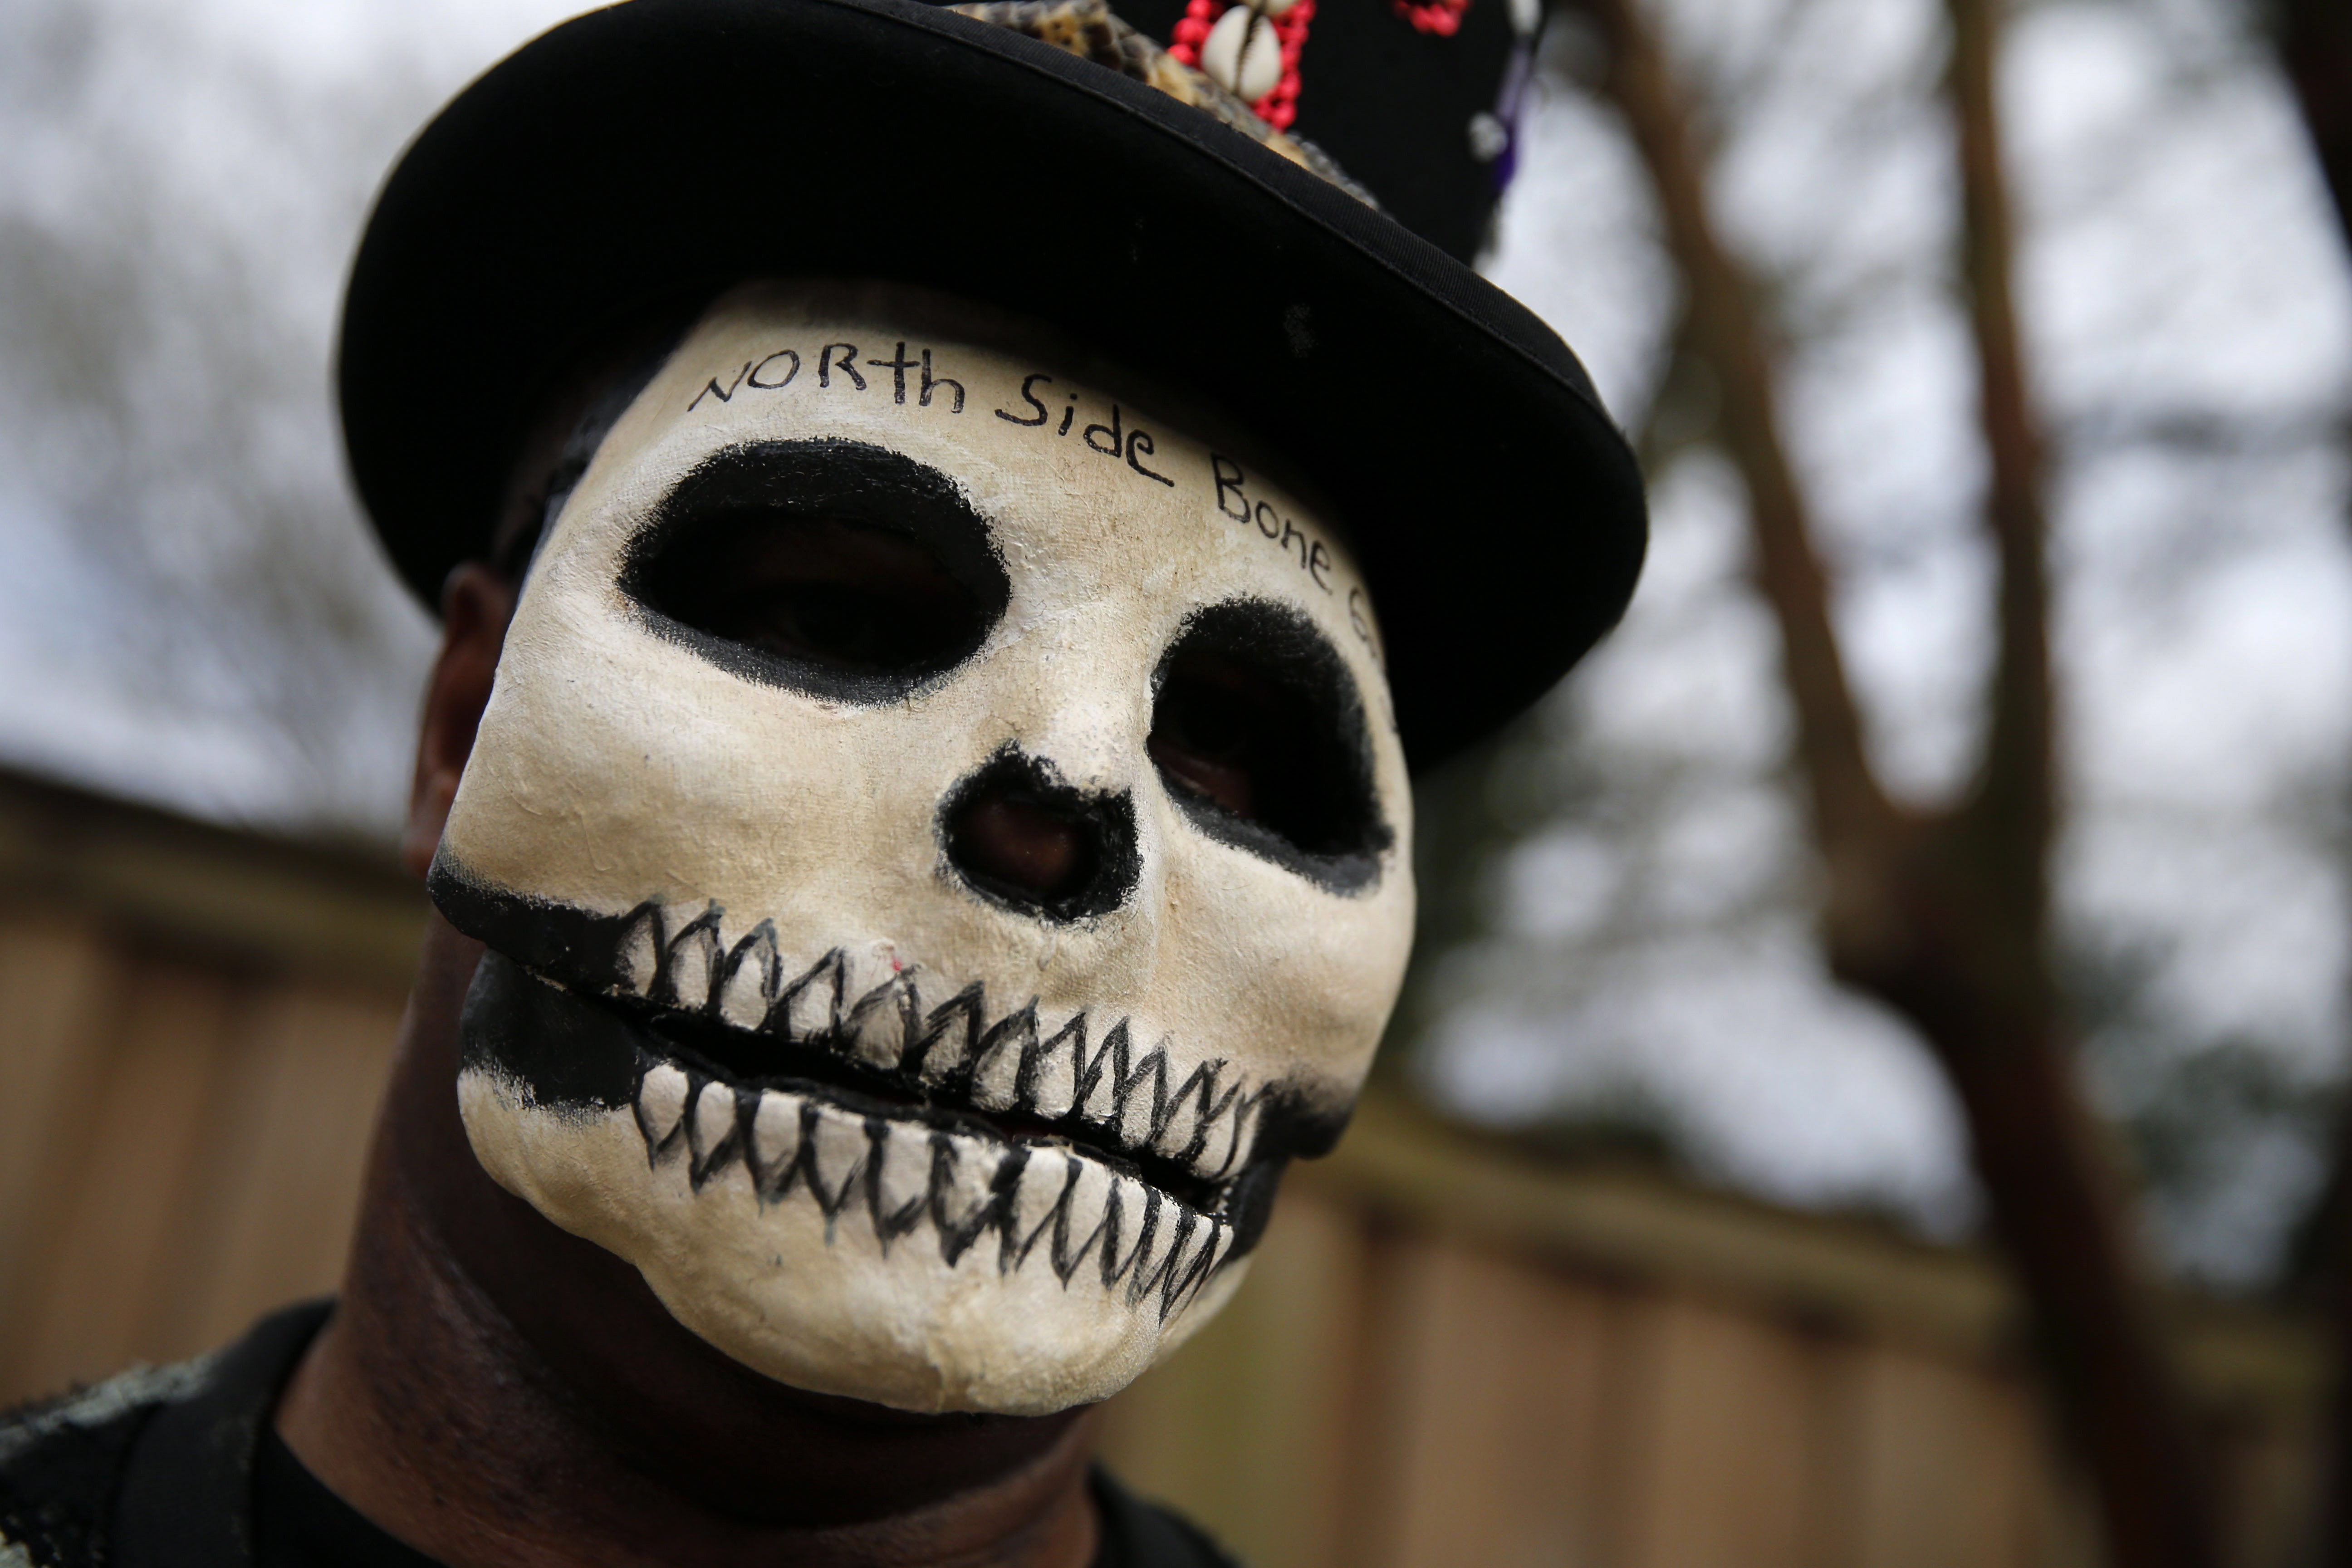 Bruce &quot;Sunpie&quot; Barnes, head of the Mardi Gras North Side Skull &amp; Bone Gang, poses with his accoutrements for upcoming Mardi Gras day, in New Orleans, Tuesday, Feb. 2, 2016. Their costumes are intended to represent the dead, and Barnes said they bring a serious message, reminding people of their mortality and the need to live a productive and good life.